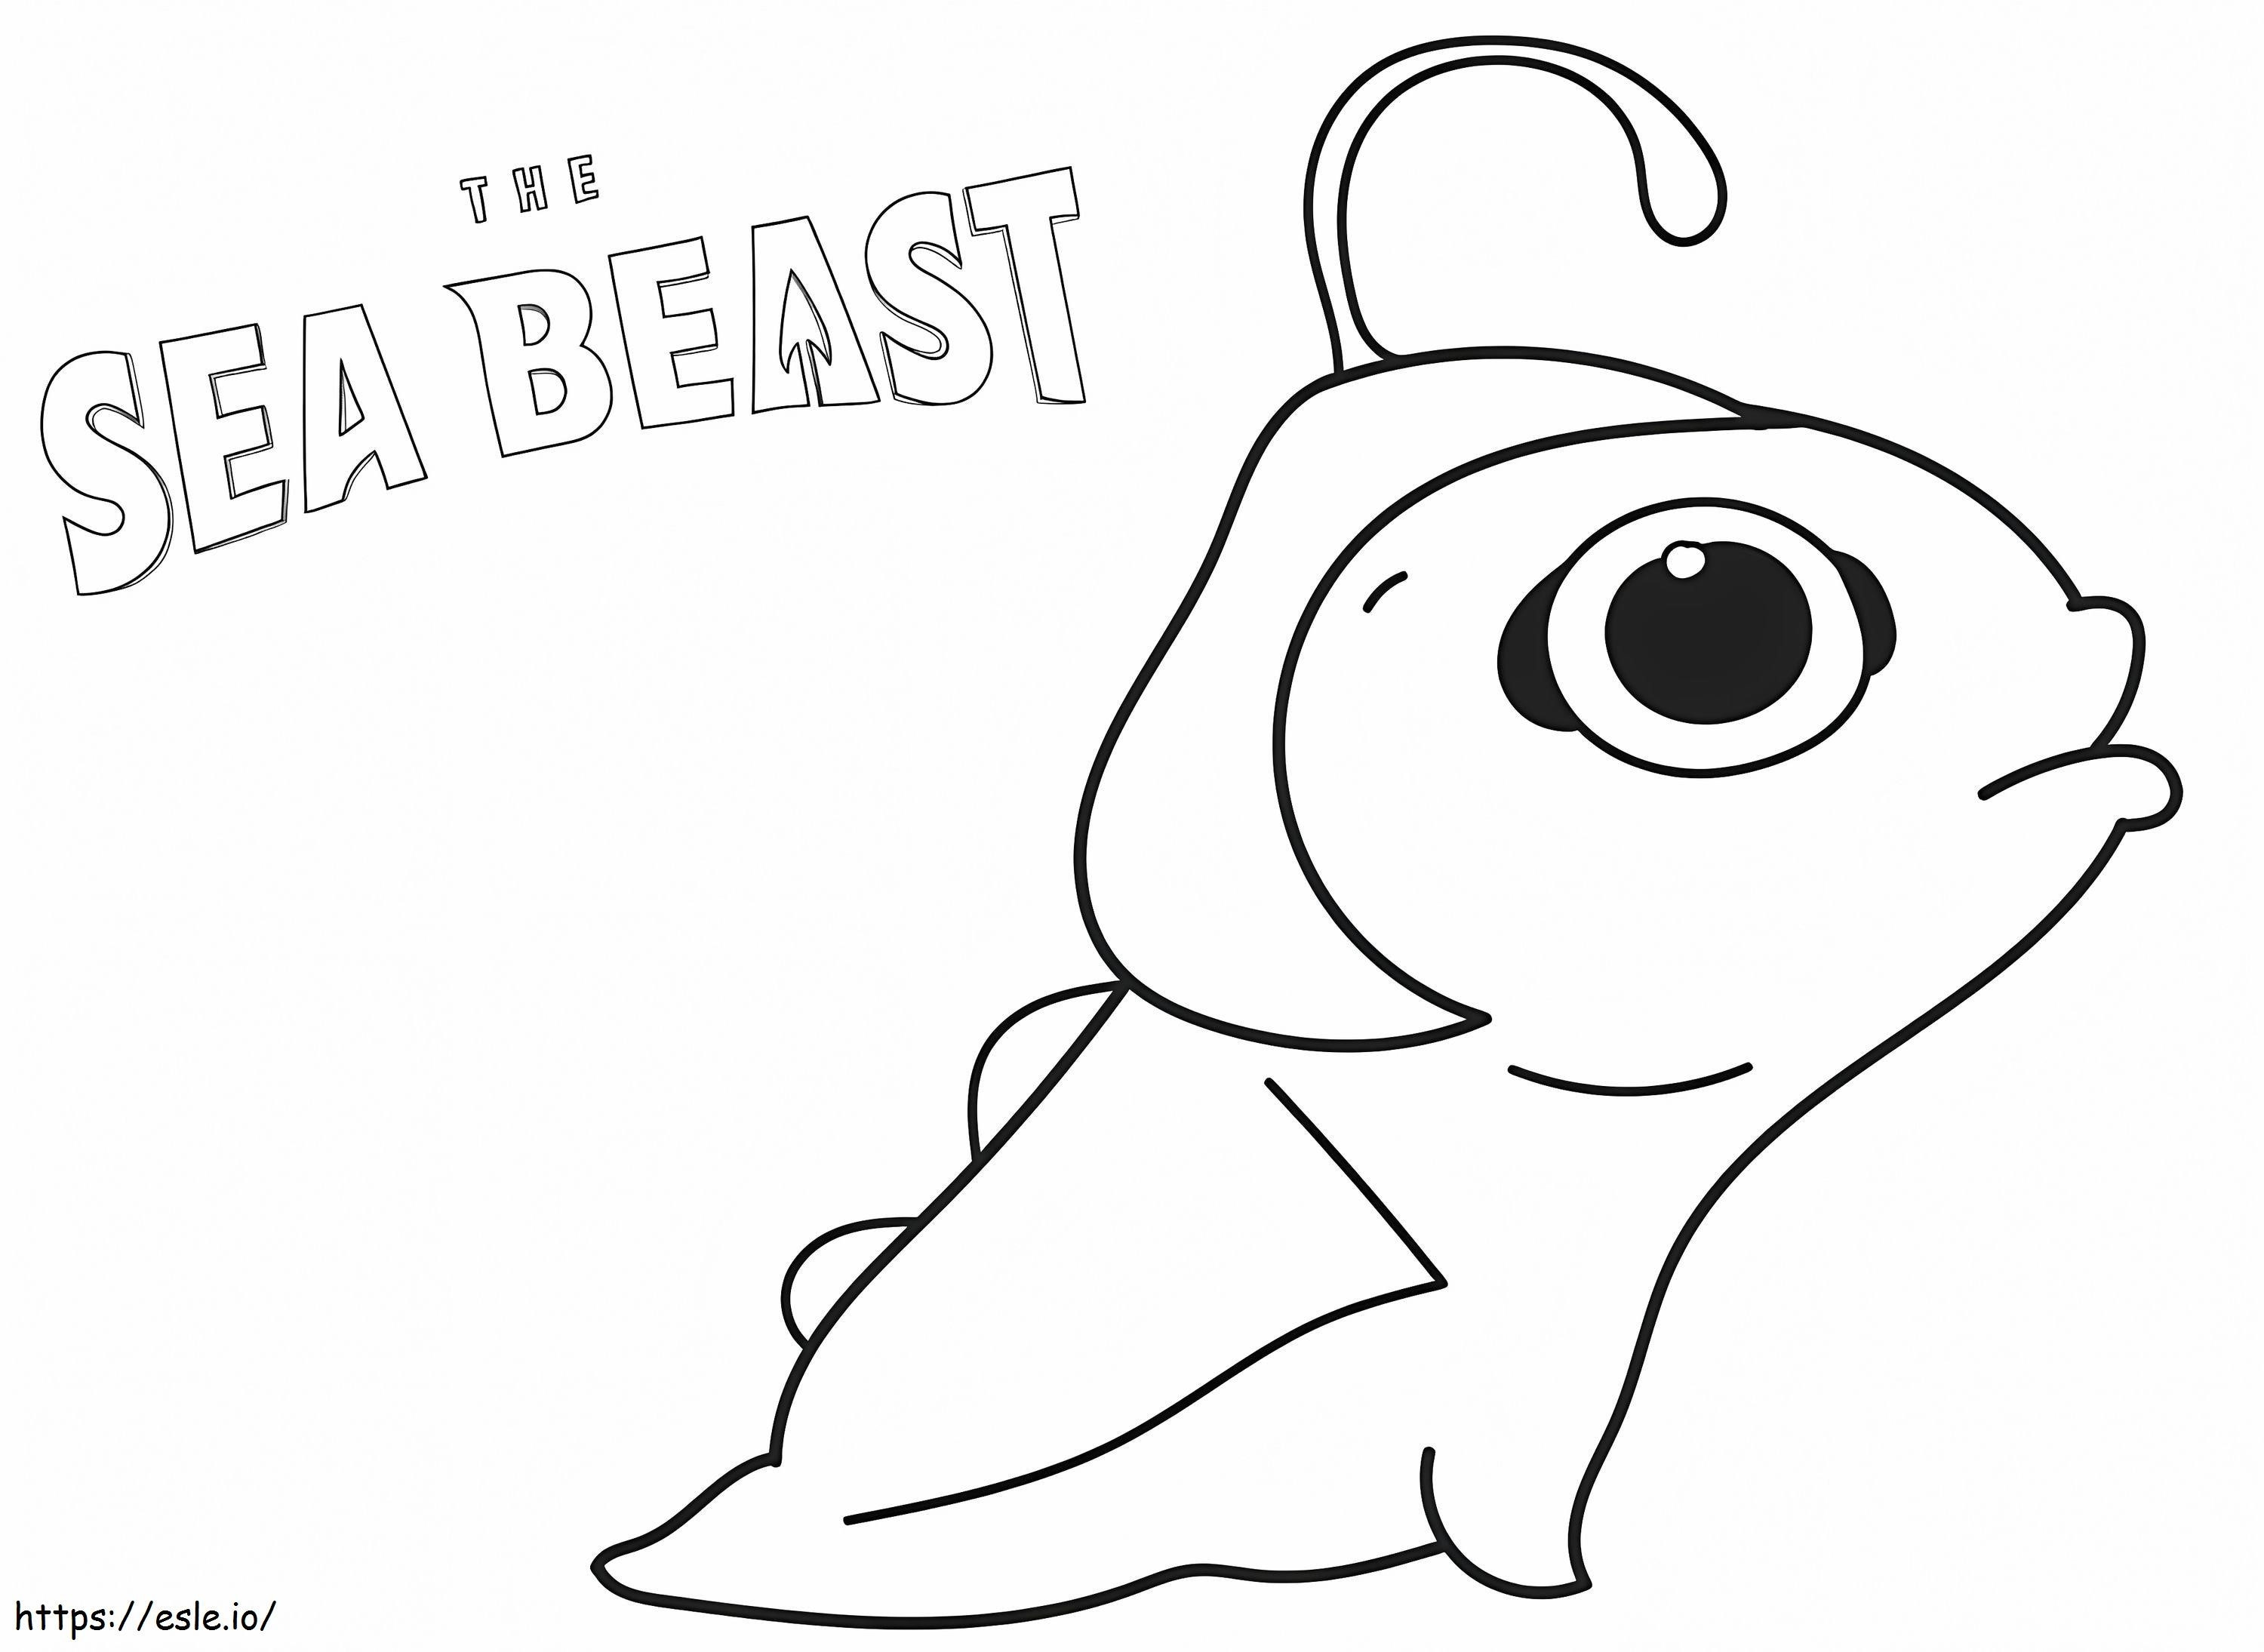 Cute Monster From The Sea Beast coloring page